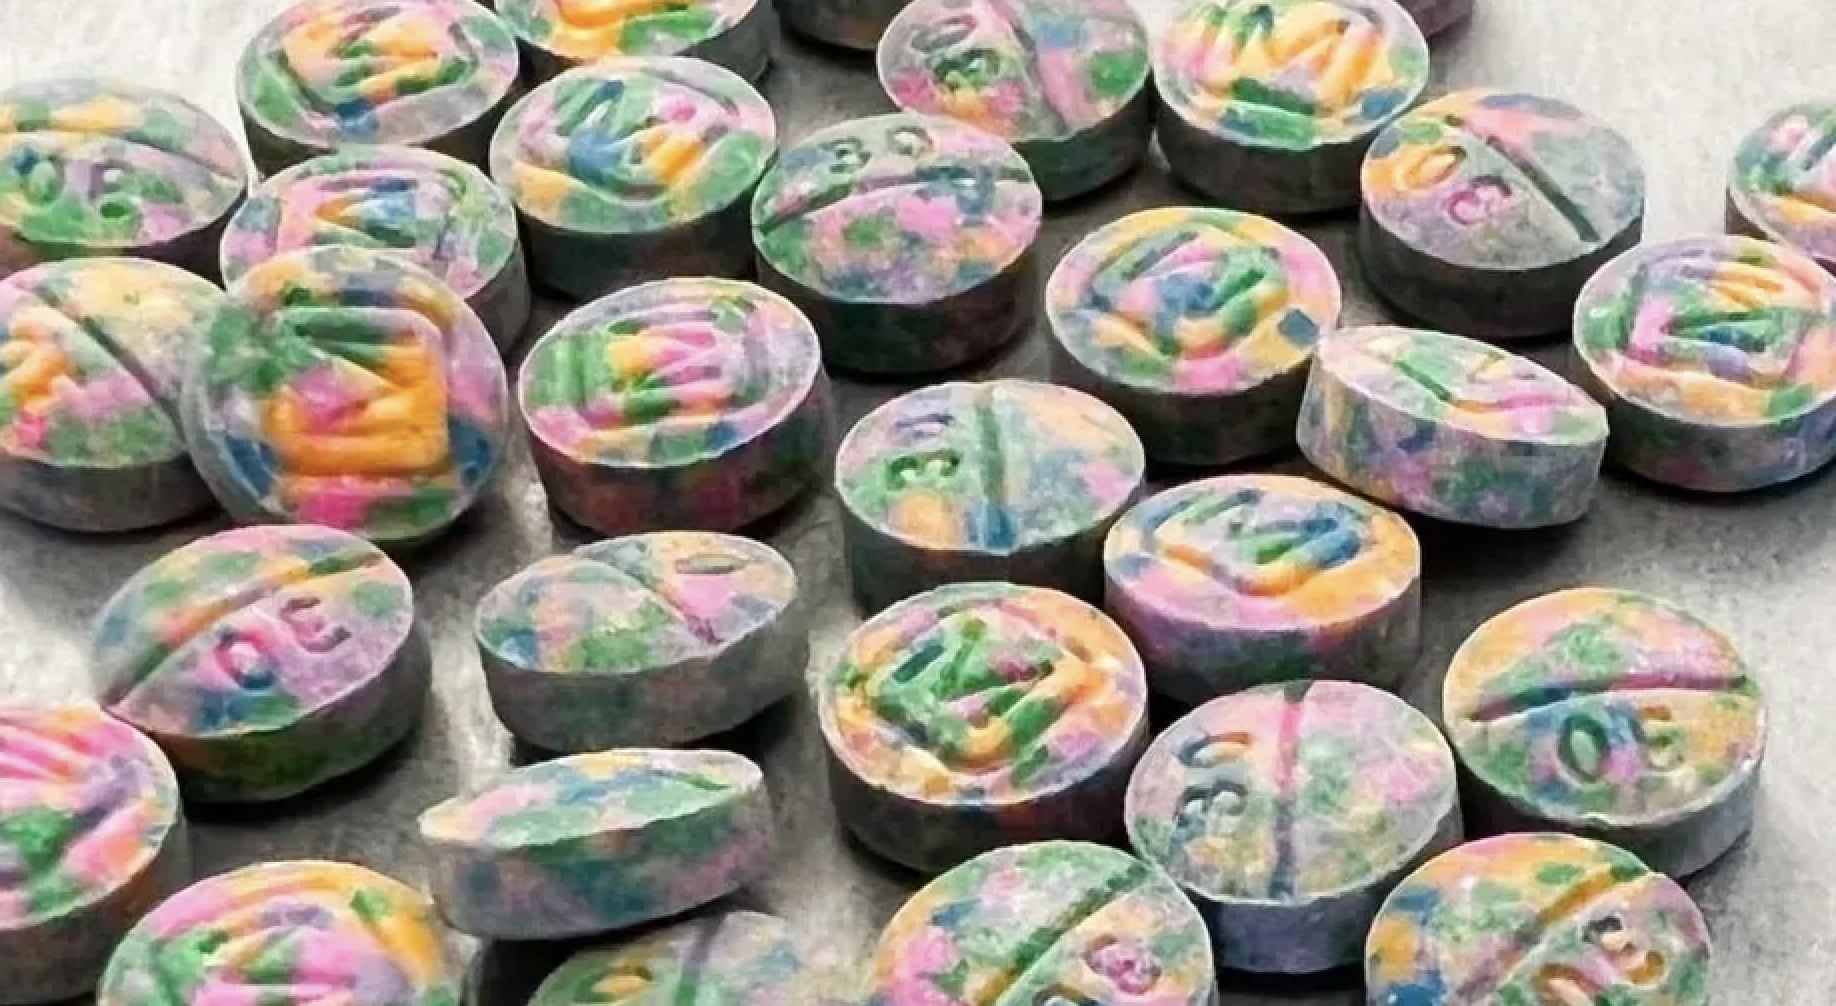 Halloween Hoax Experts Say Rainbow Fentanyl As Candy Is Not A Serious